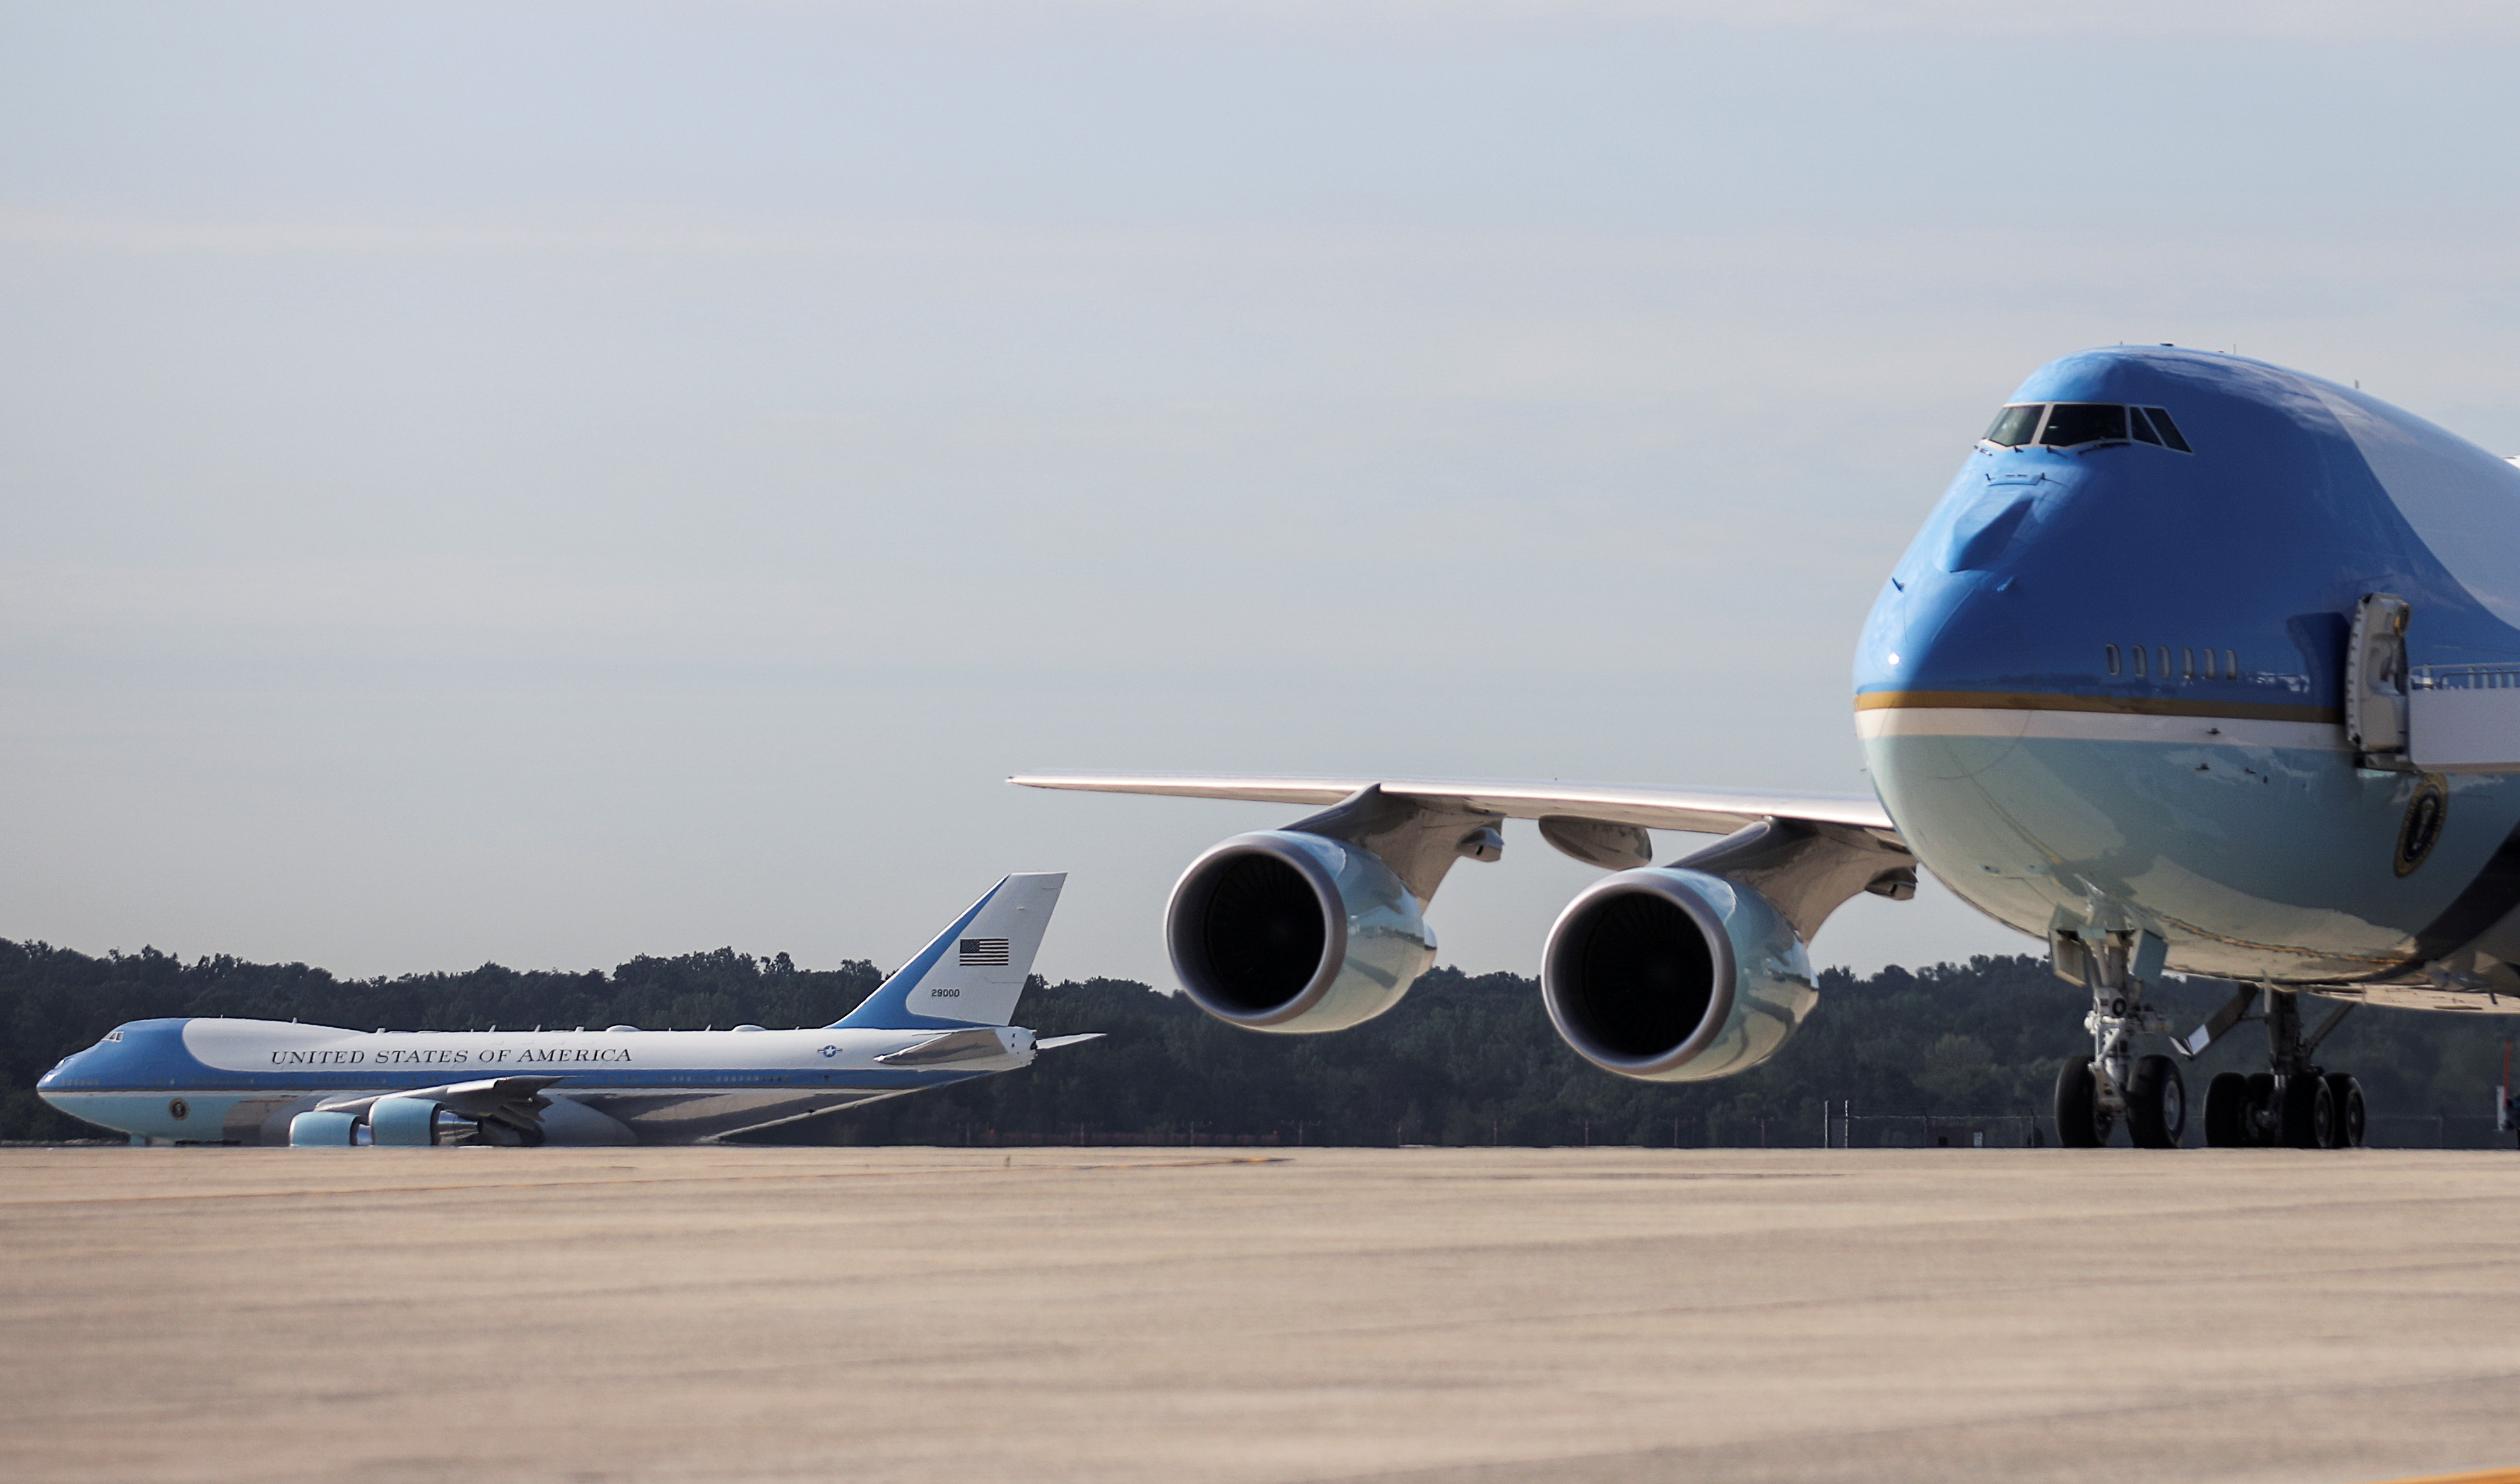 A pair of Boeing 747 Air Force One presidential aircraft are seen at Joint Base Andrews in Maryland